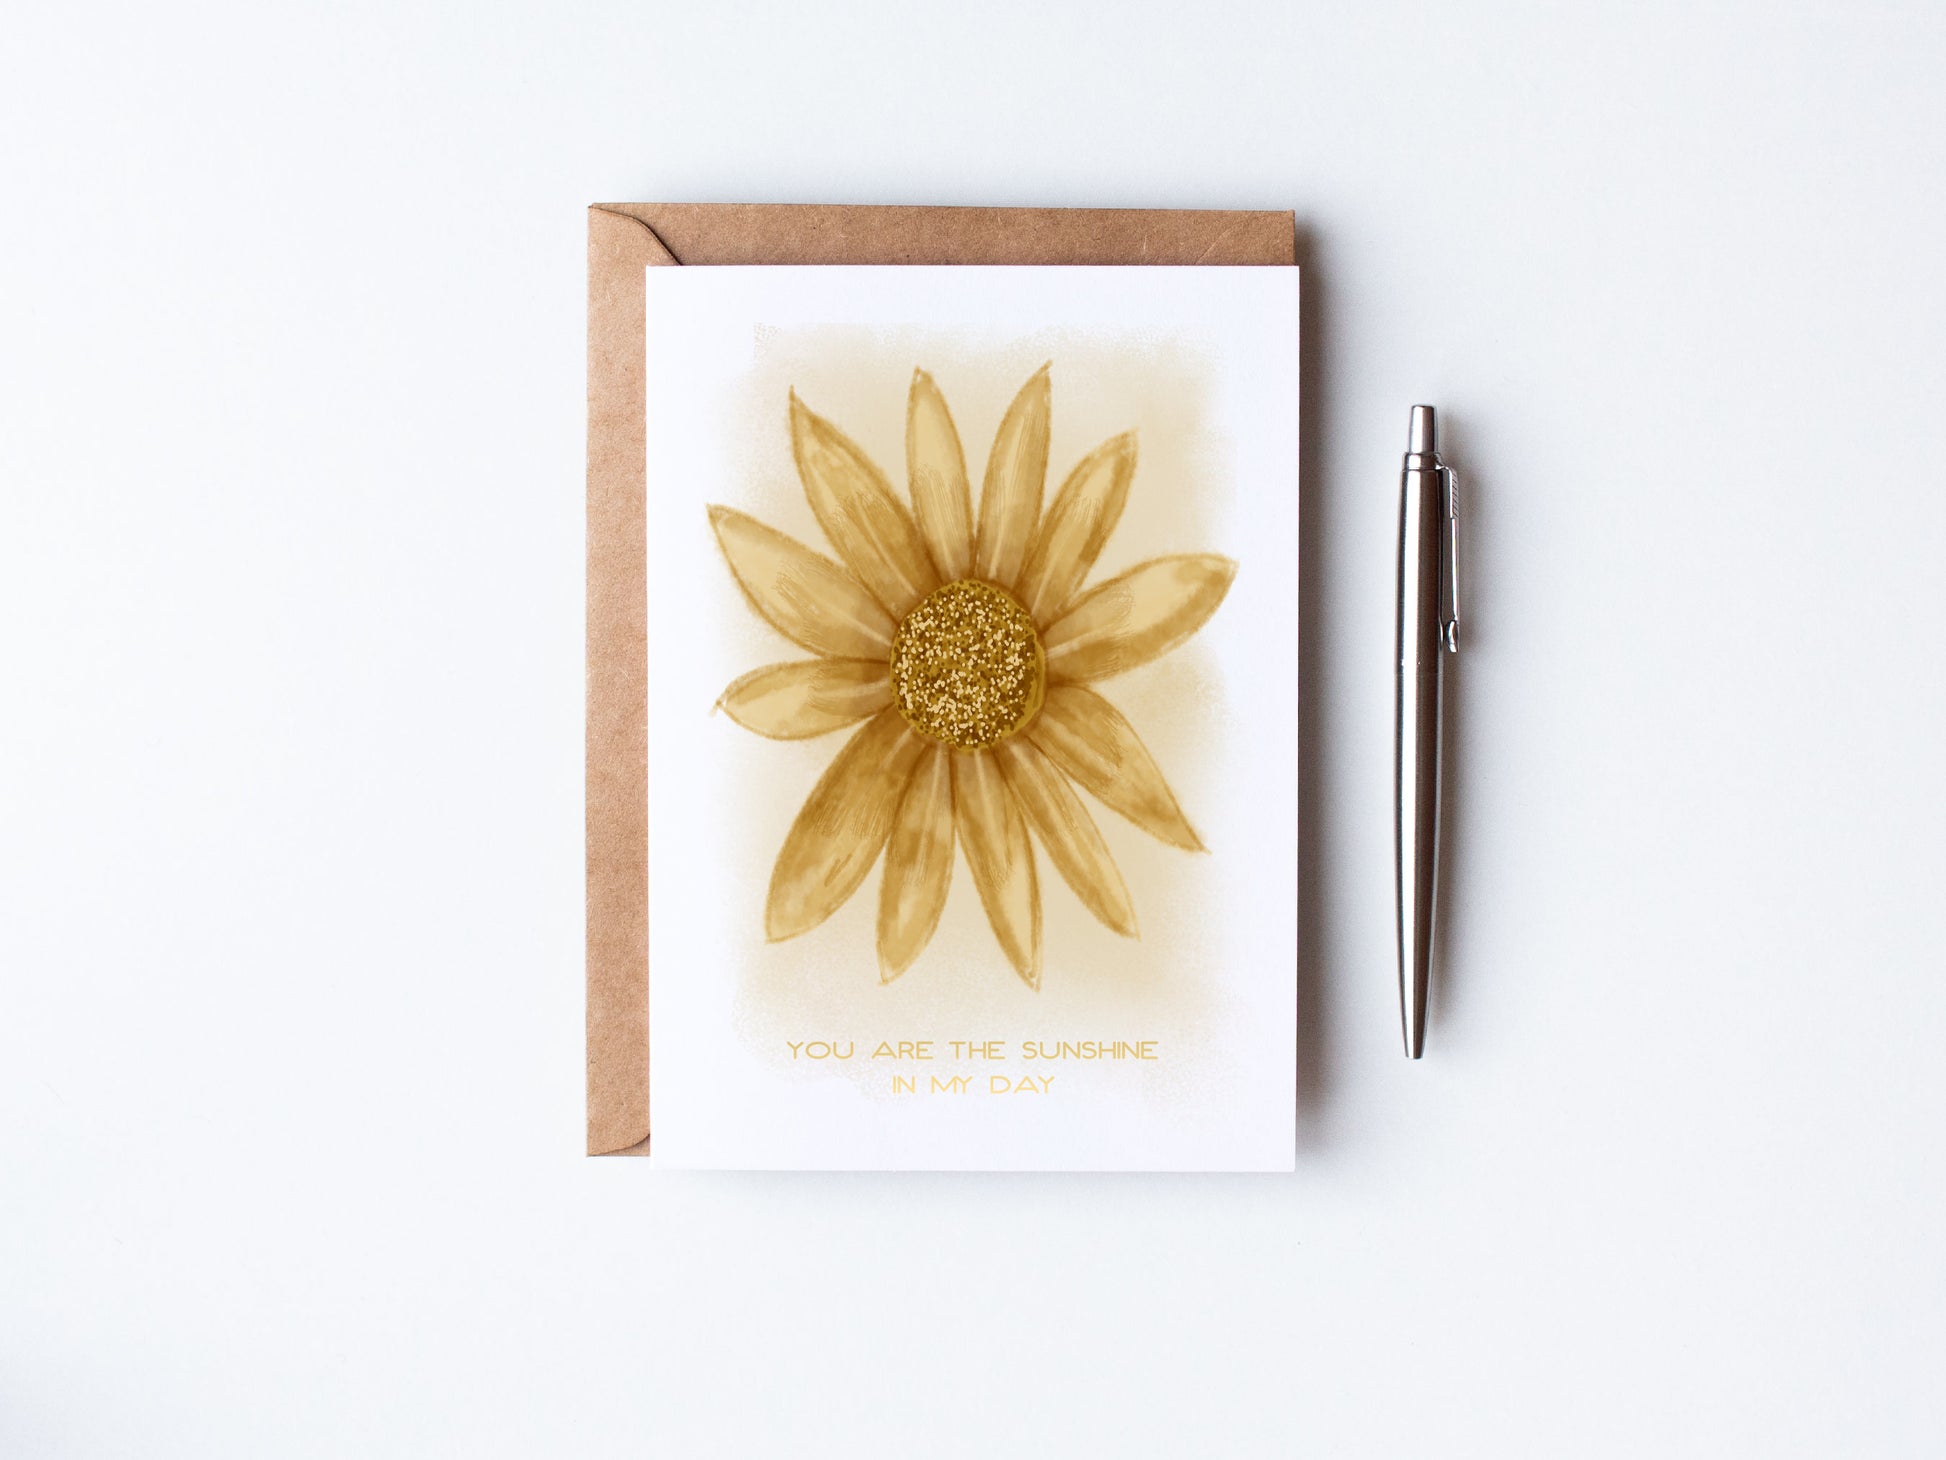 Sunshine greeting card - Sunflower - golds and yellows - you are the sunshine in my day